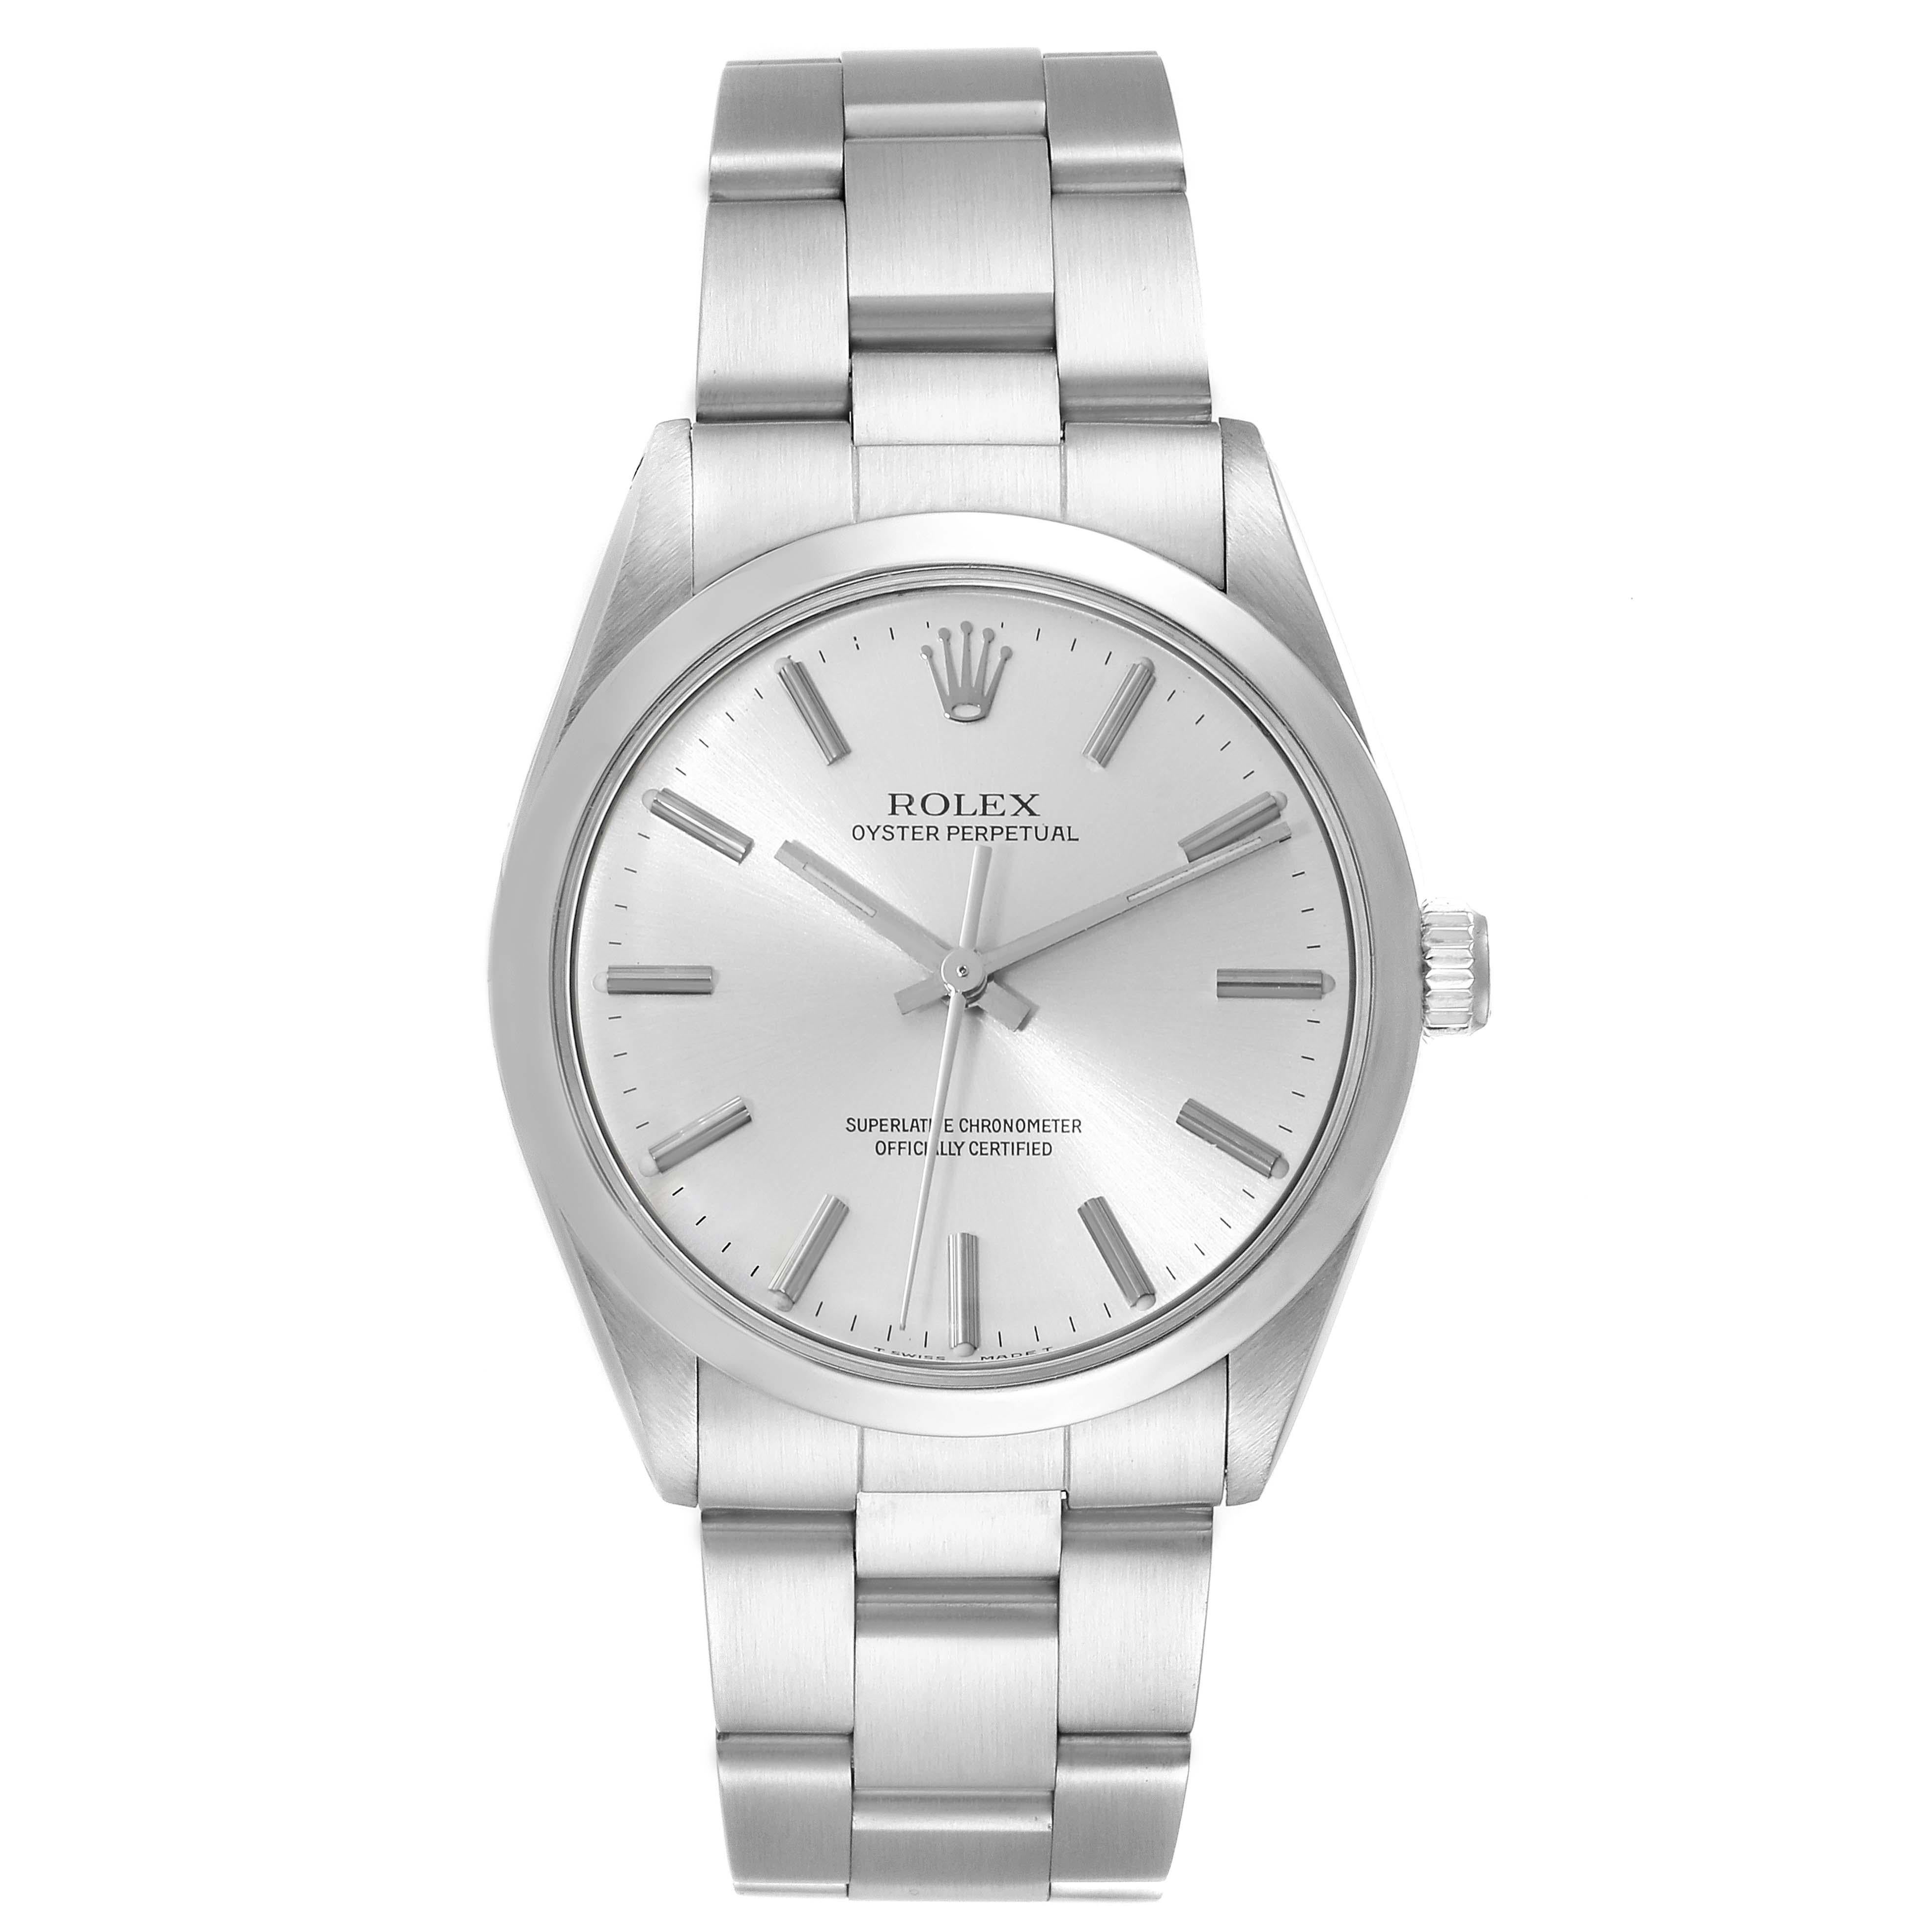 Rolex Oyster Perpetual Silver Dial Vintage Steel Mens Watch 1002. Officially certified chronometer automatic self-winding movement. Stainless steel oyster case 34.0 mm in diameter.  Rolex logo on the crown. Stainless steel smooth bezel. Domed